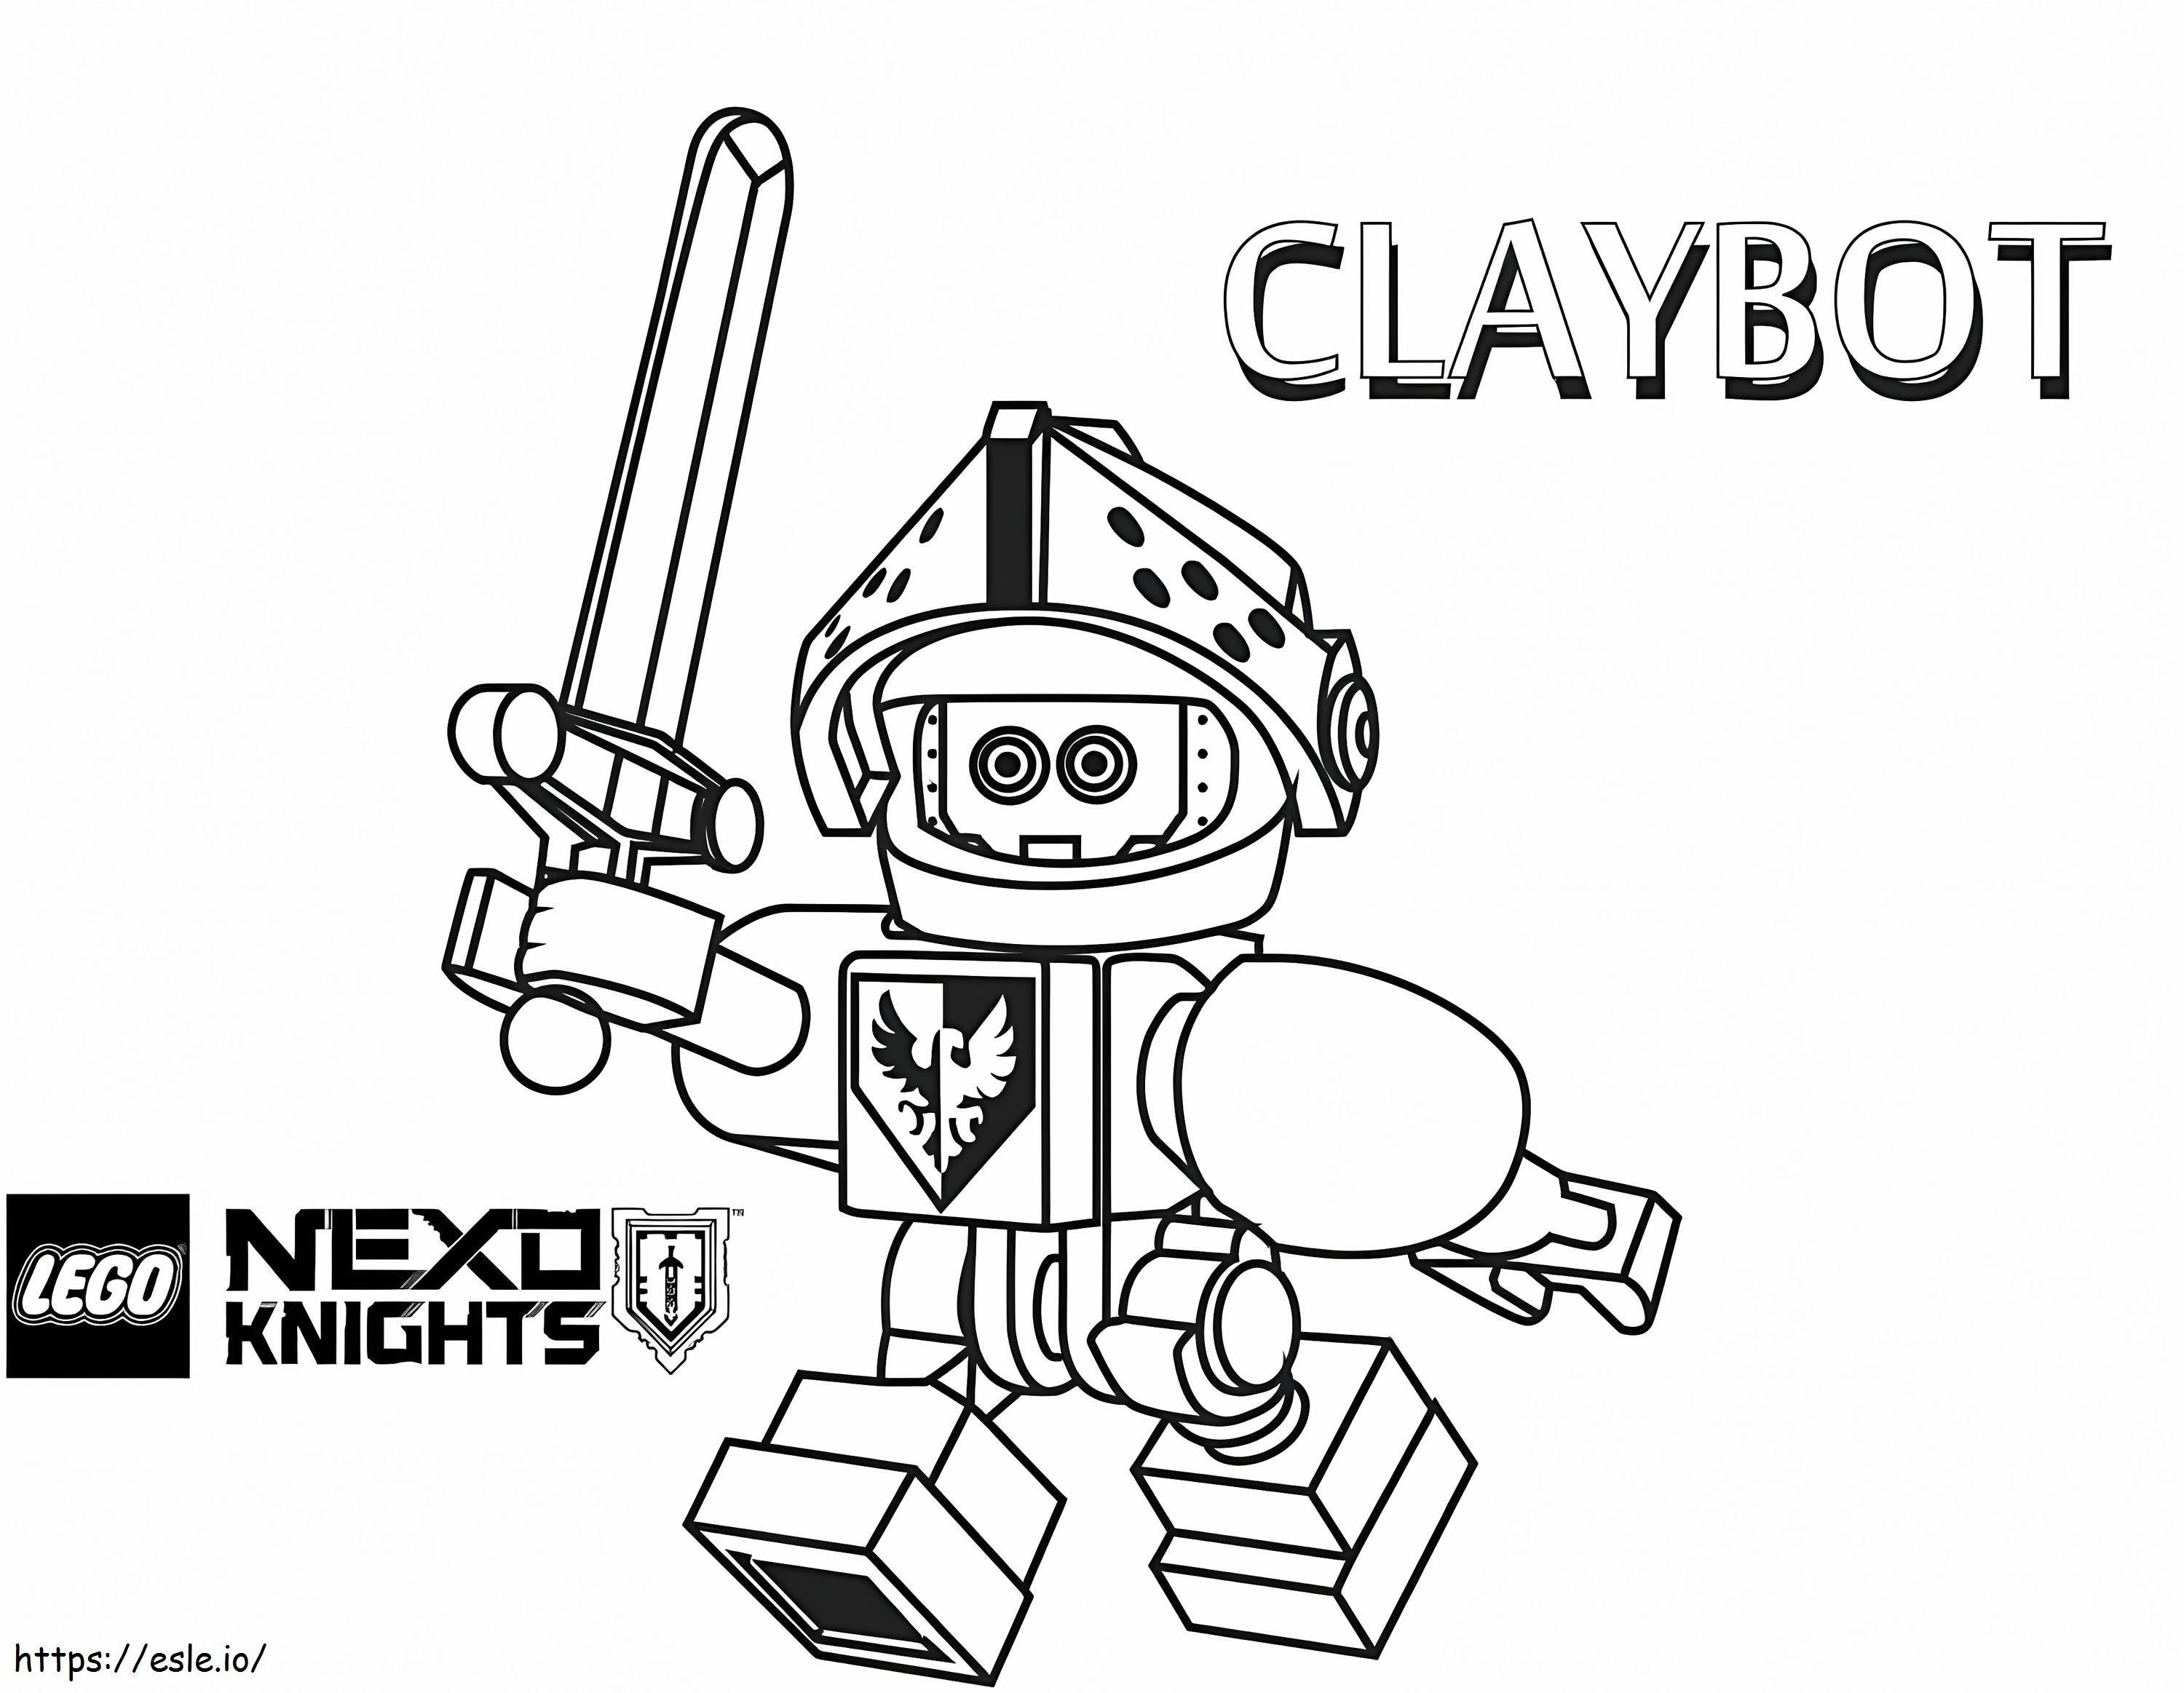 Claybo From Nexo Knights coloring page